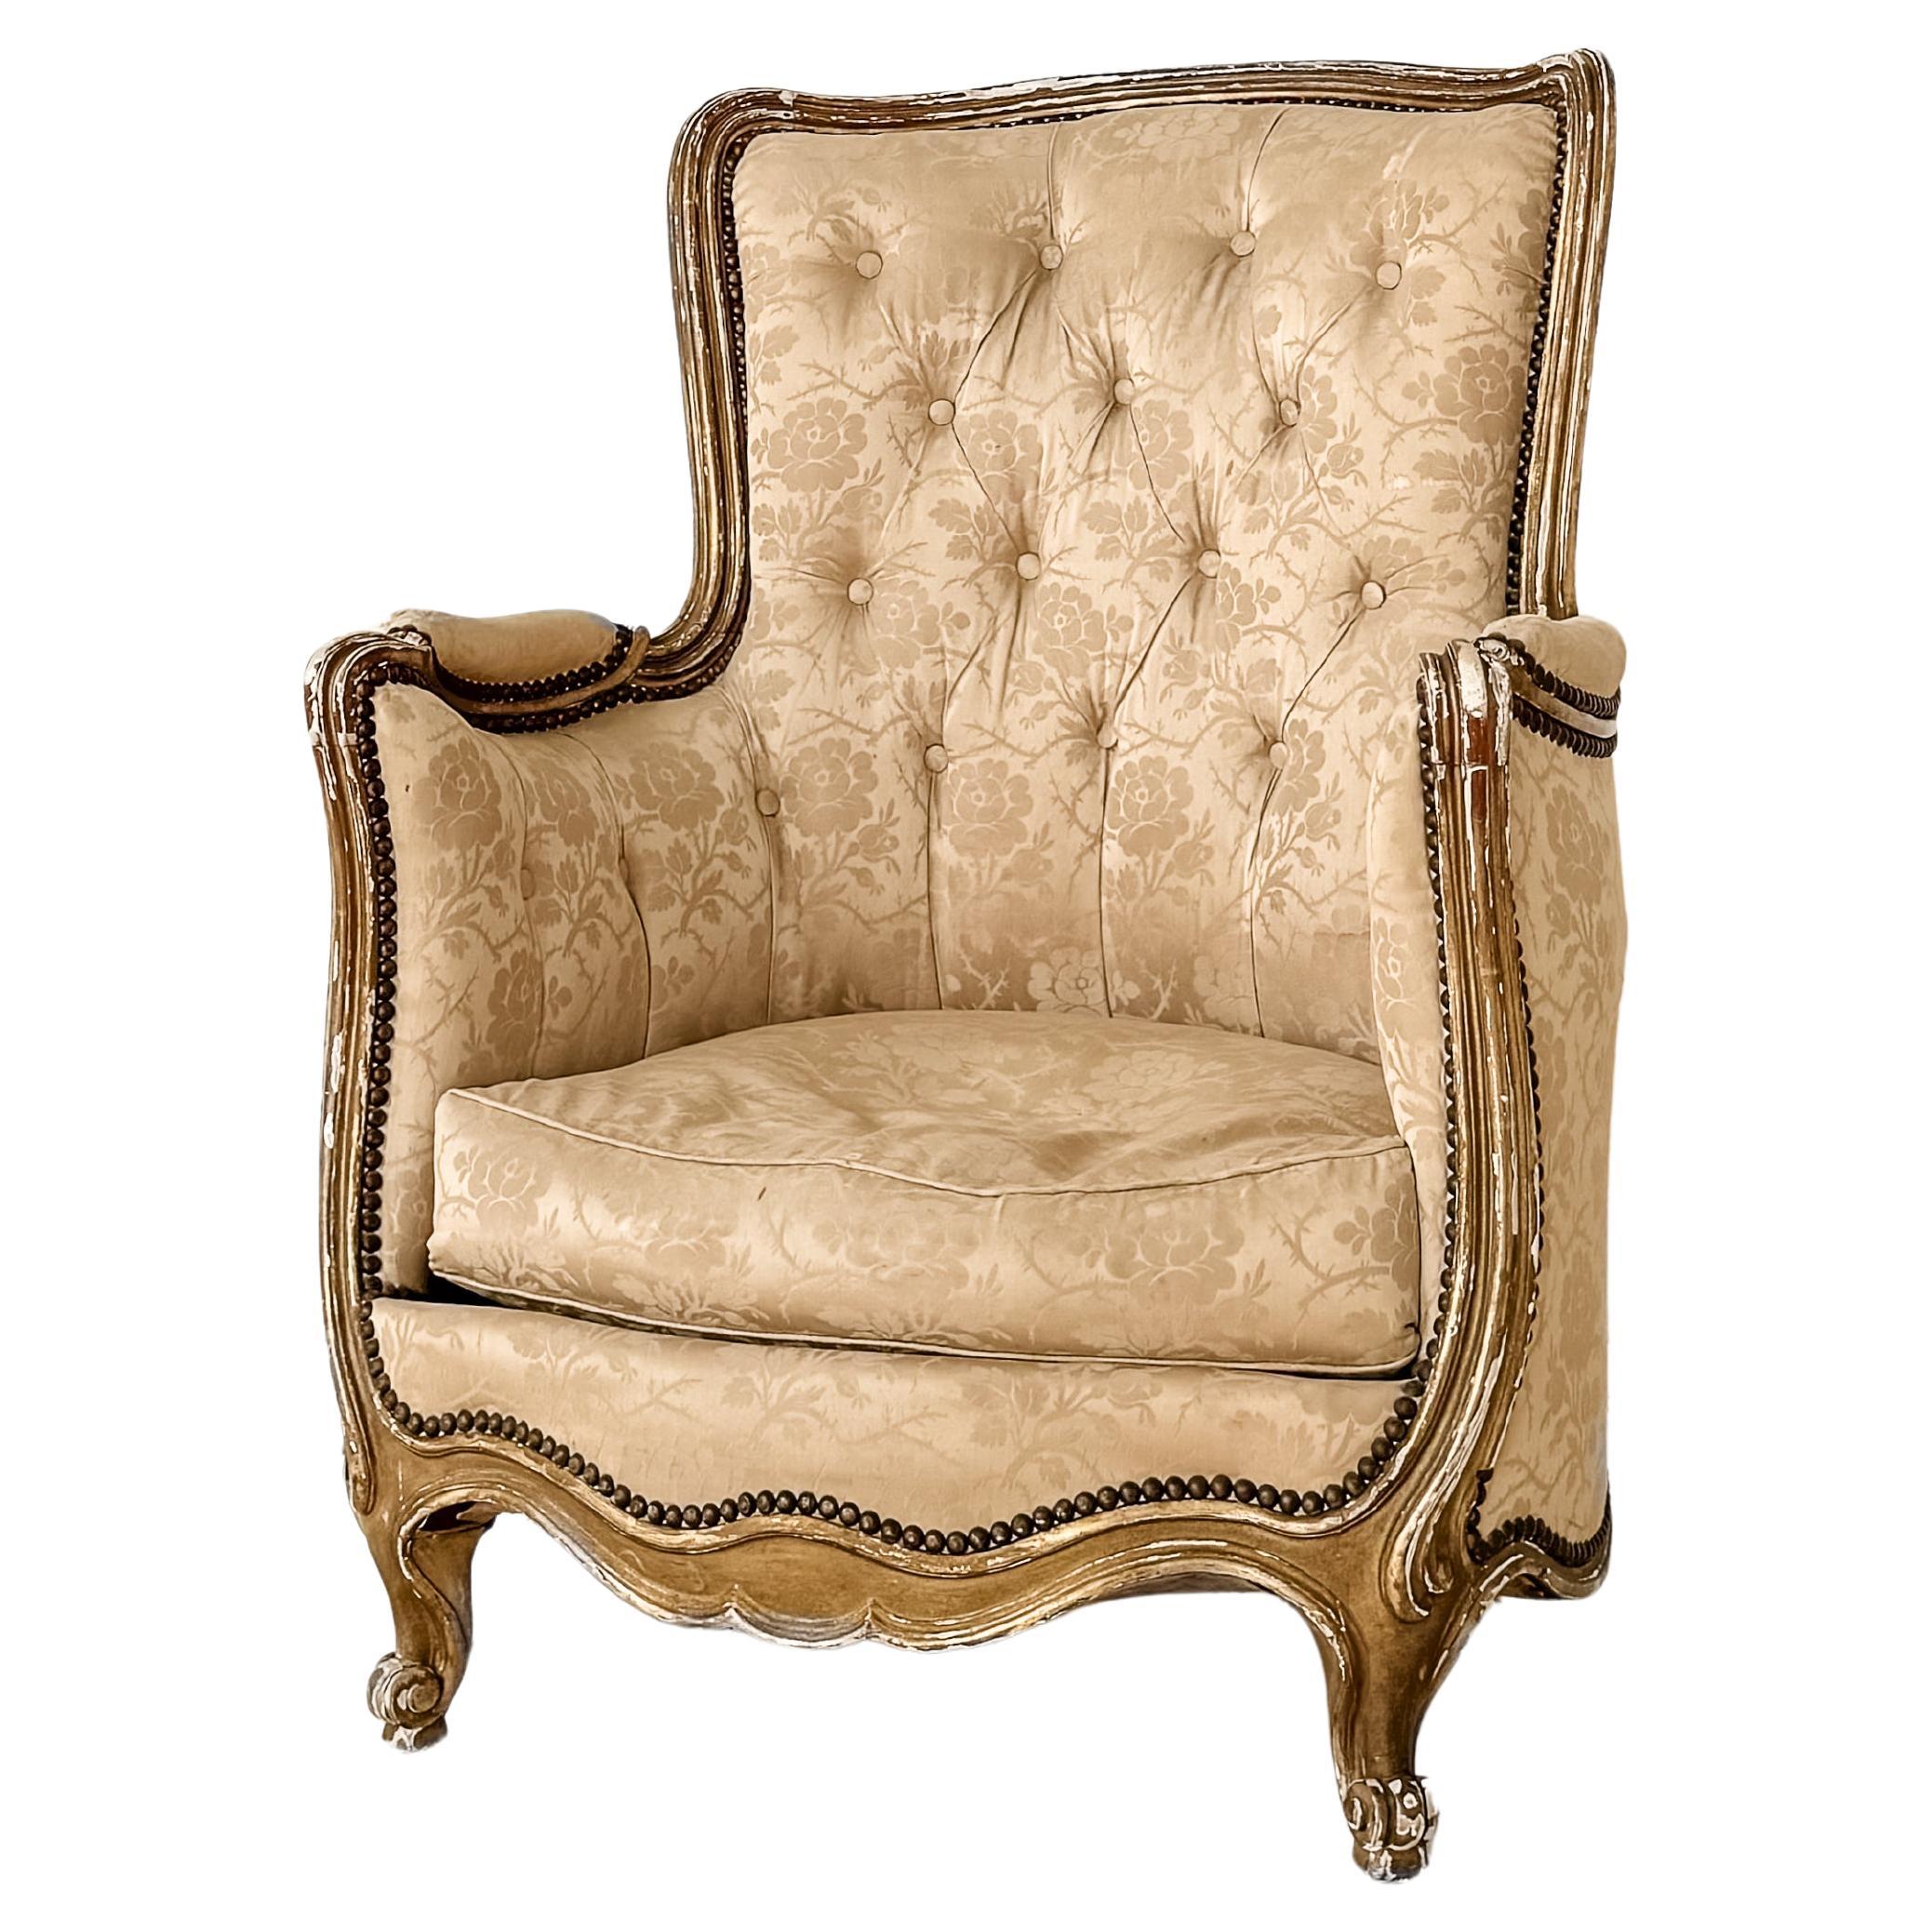 Tufted Silk Damask Louis XV Style Bergere Chair